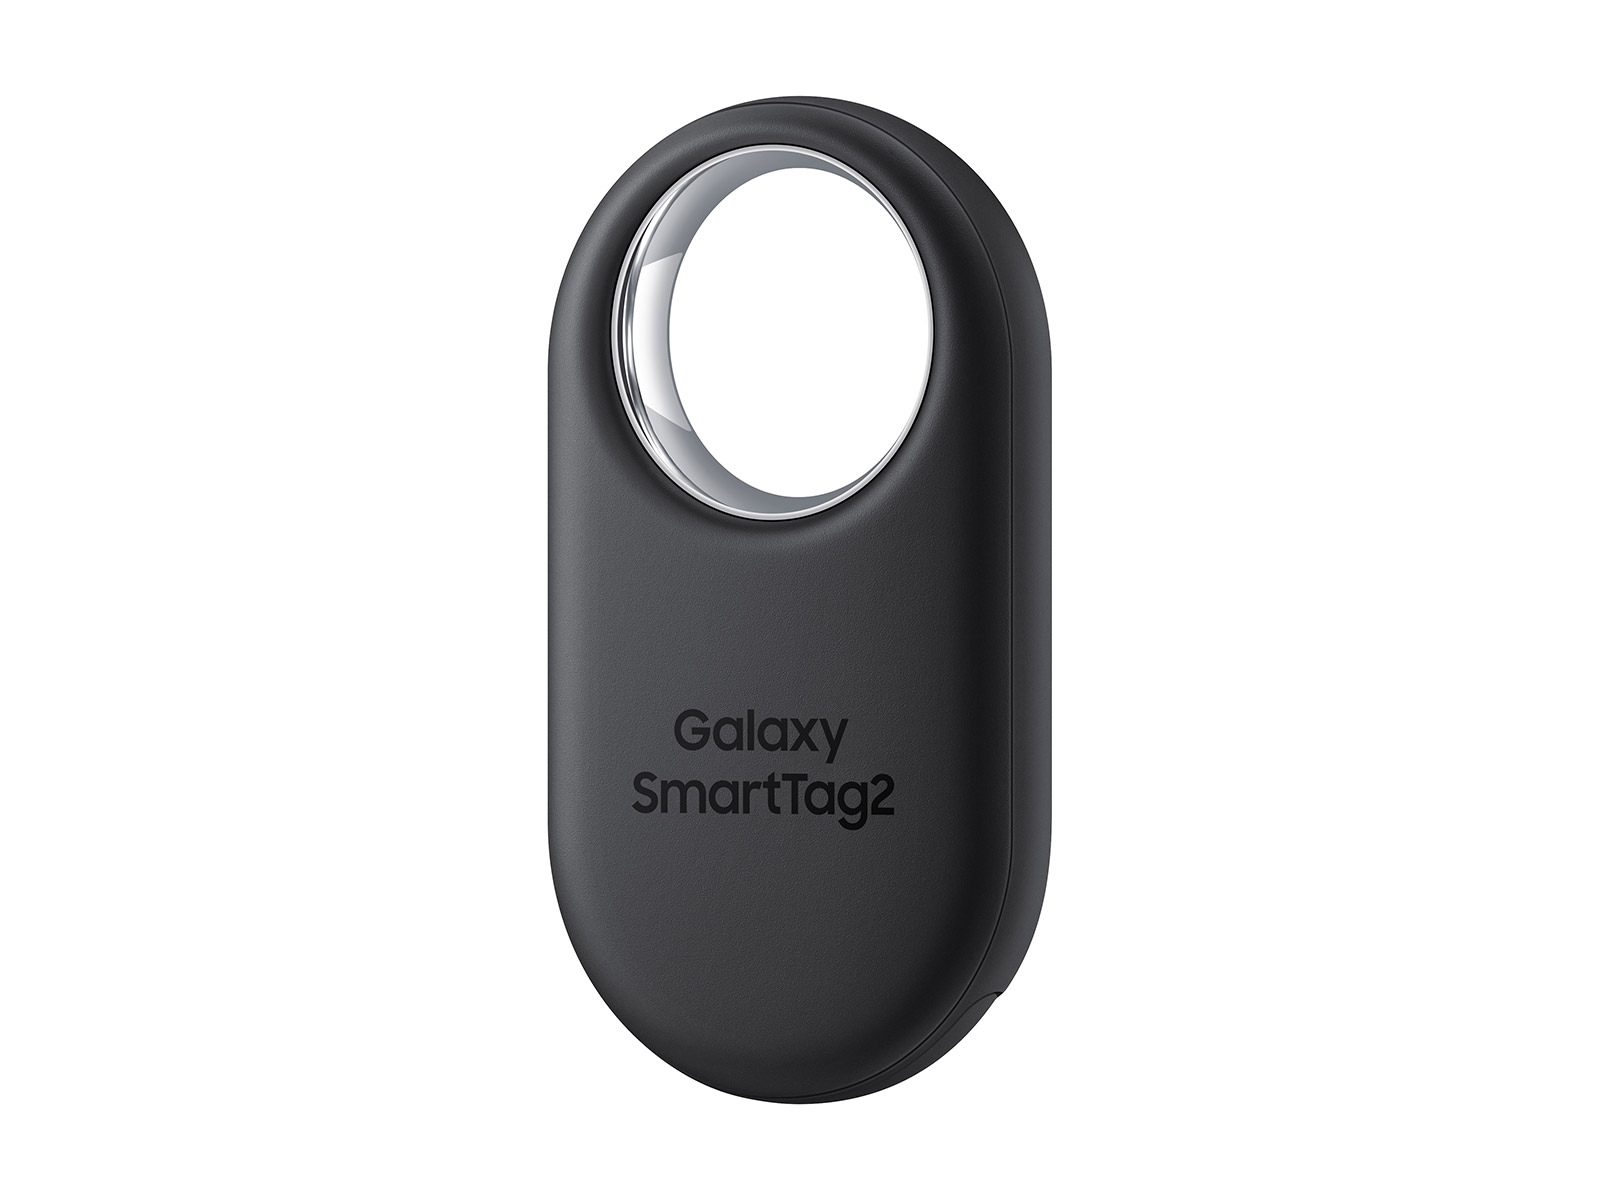 Samsung Galaxy SmartTag 2 arrives with IP67 & 700 days battery